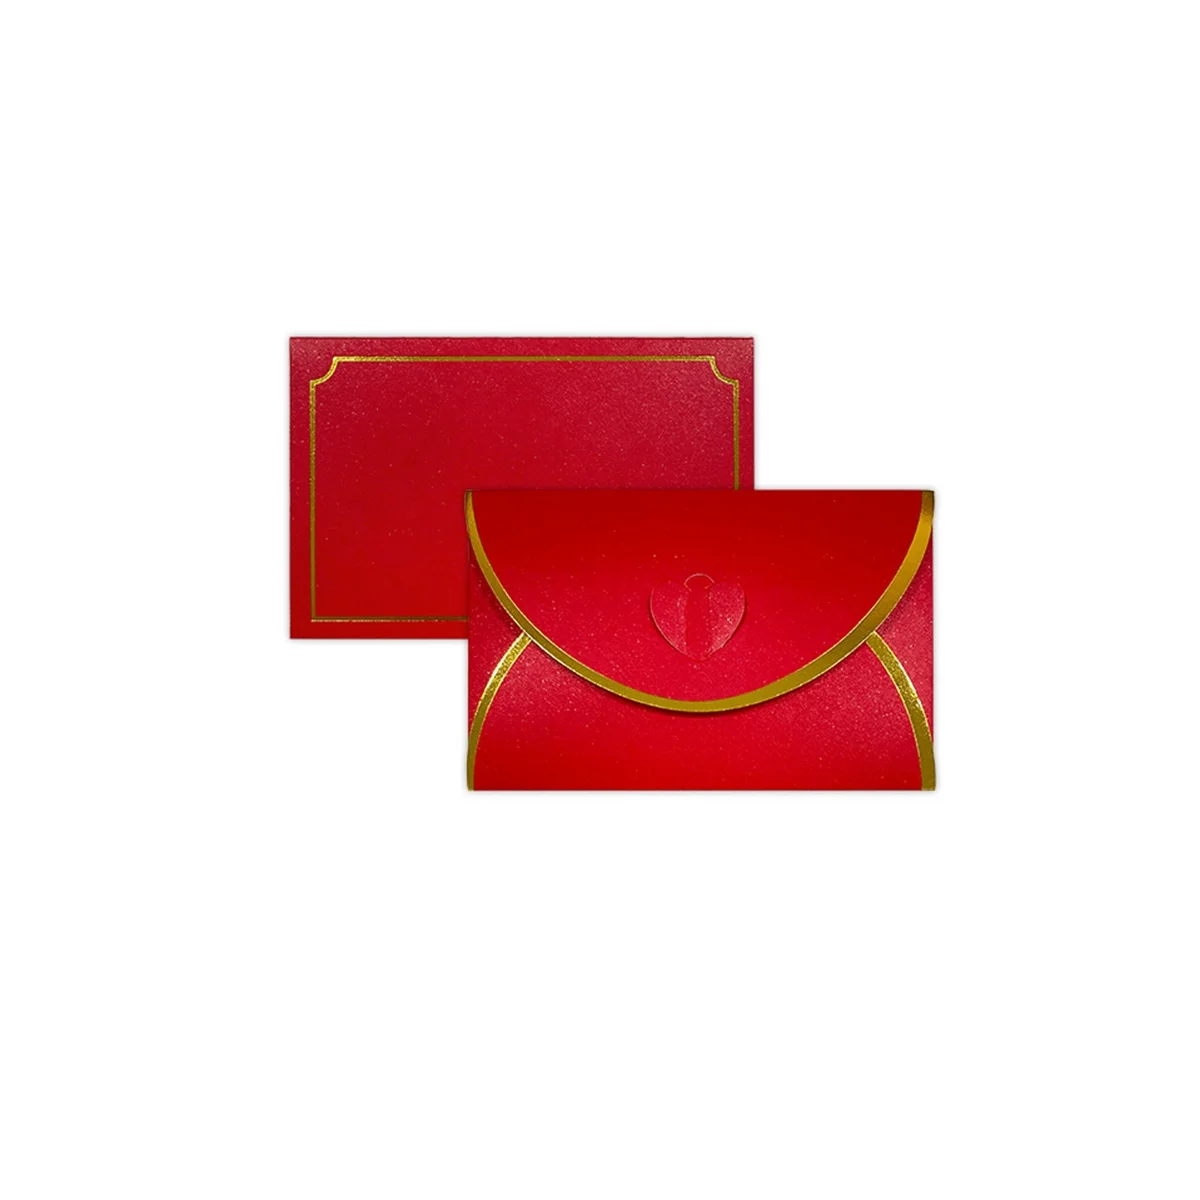 

50Pcs Gift Card Envelopes with Love Buckle Envelopes with Gold Border, Envelope for Note Cards, Wedding Red